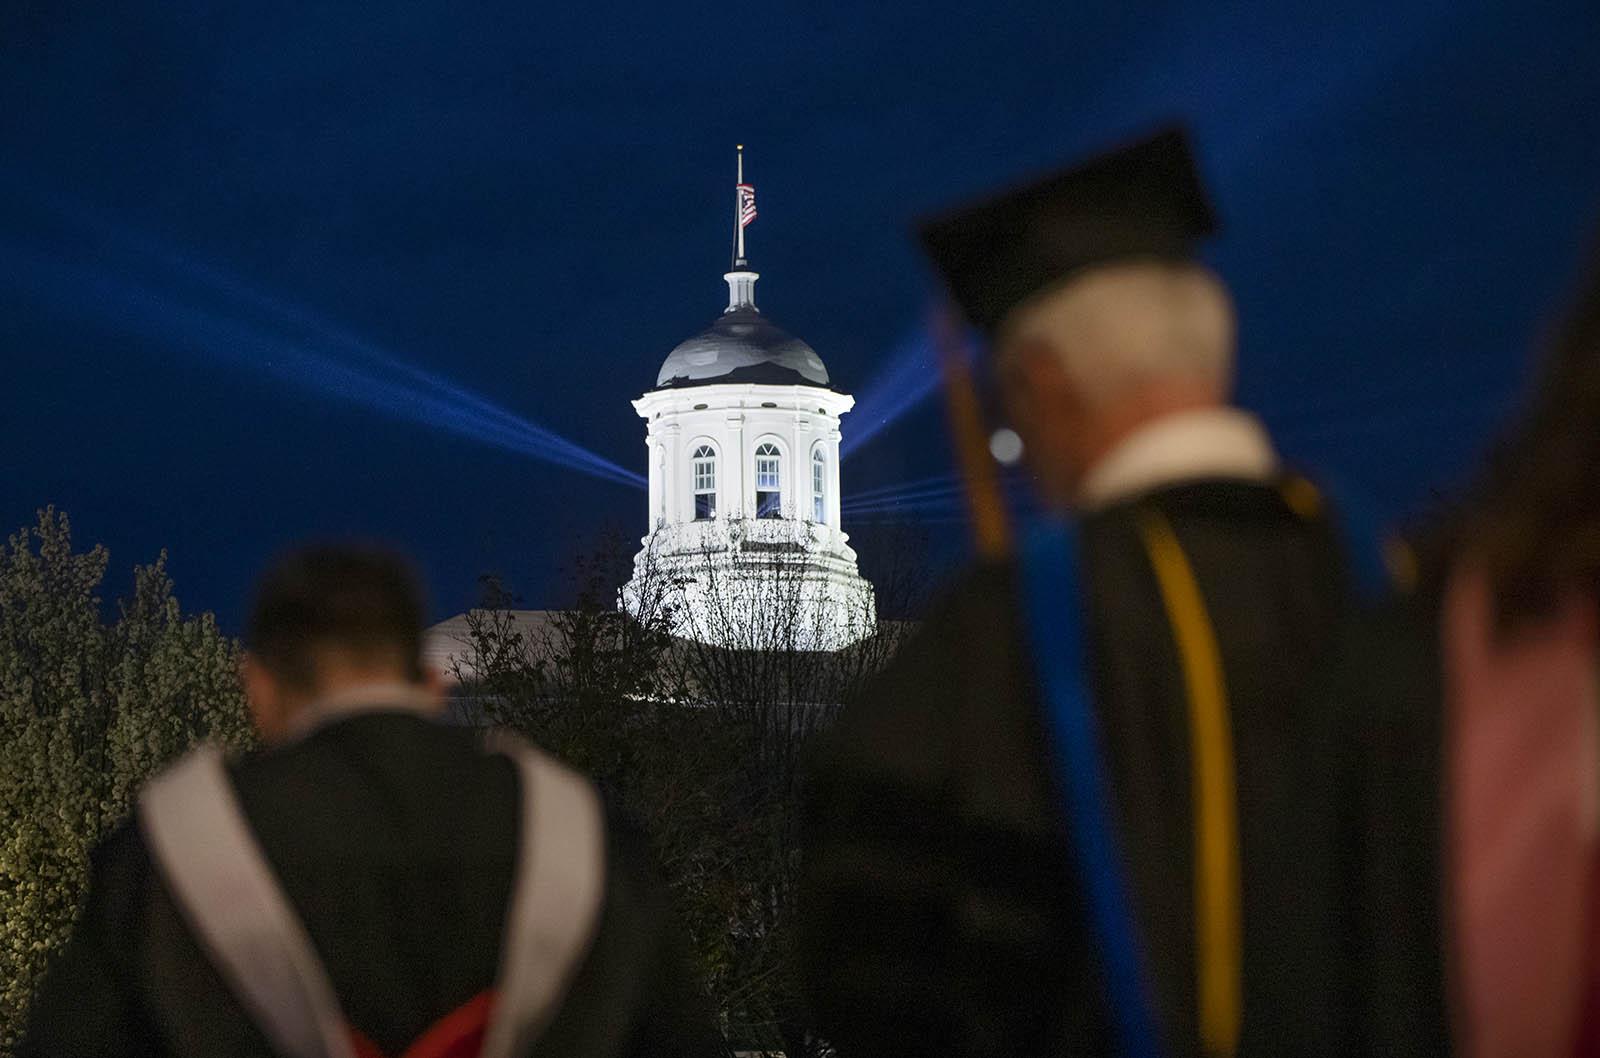 Spotlights shine from the Main Hall cupola after the inauguration ceremony of President Laurie A. Carter.